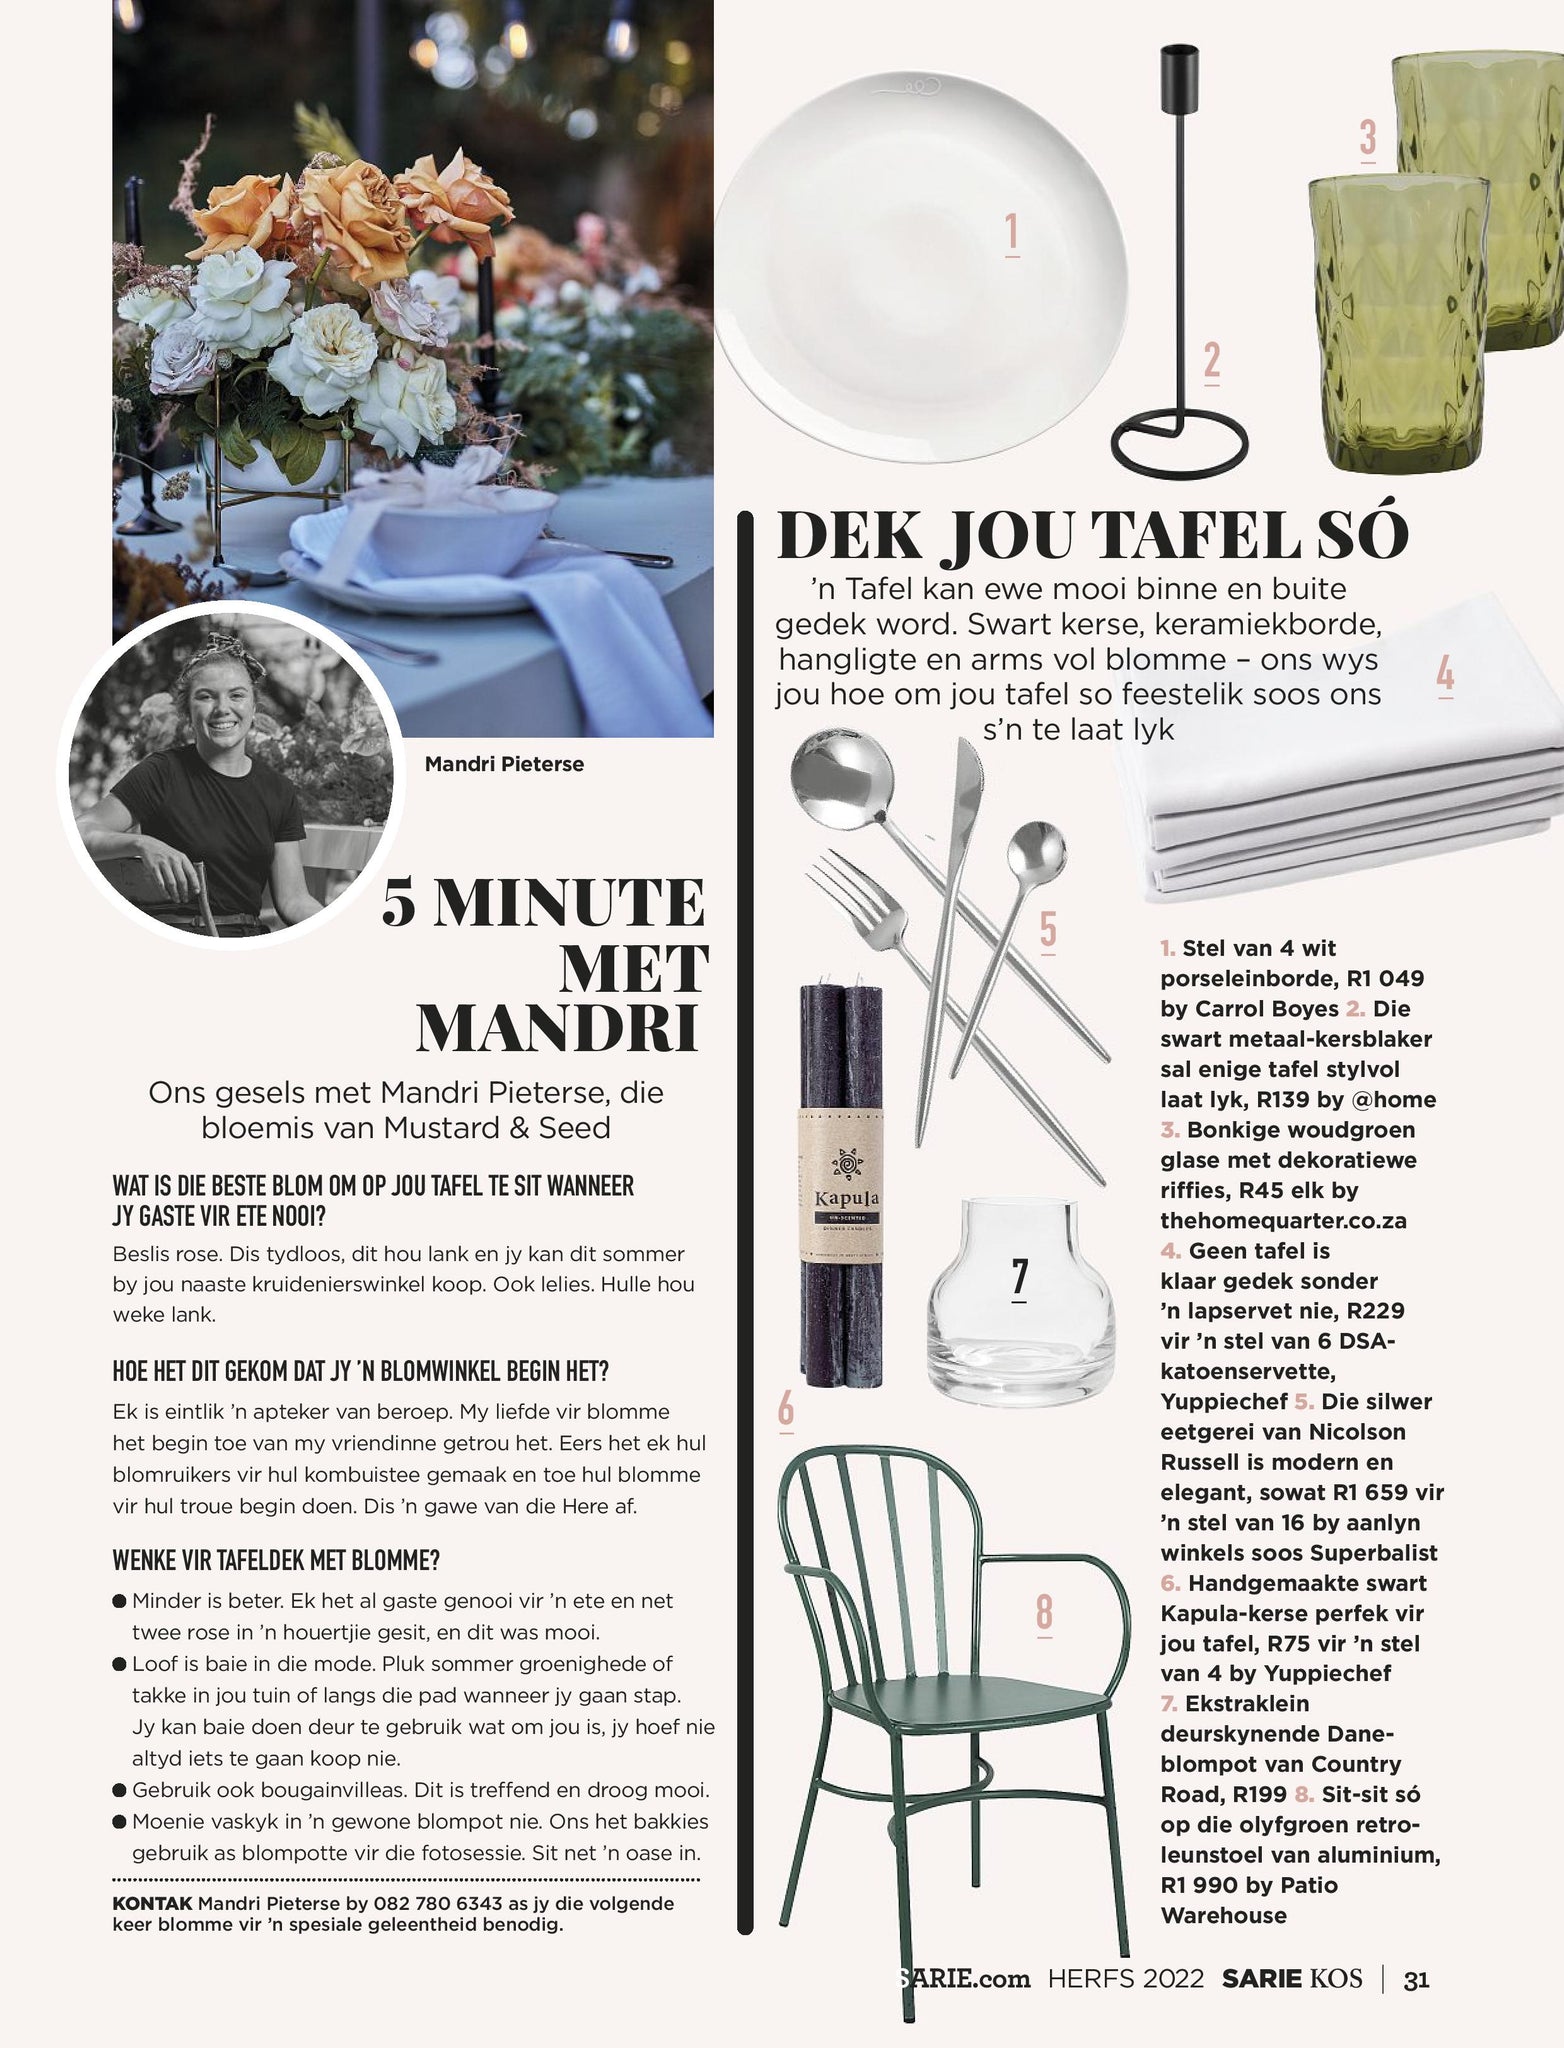 The Home Quarter featured in Sarie magazine